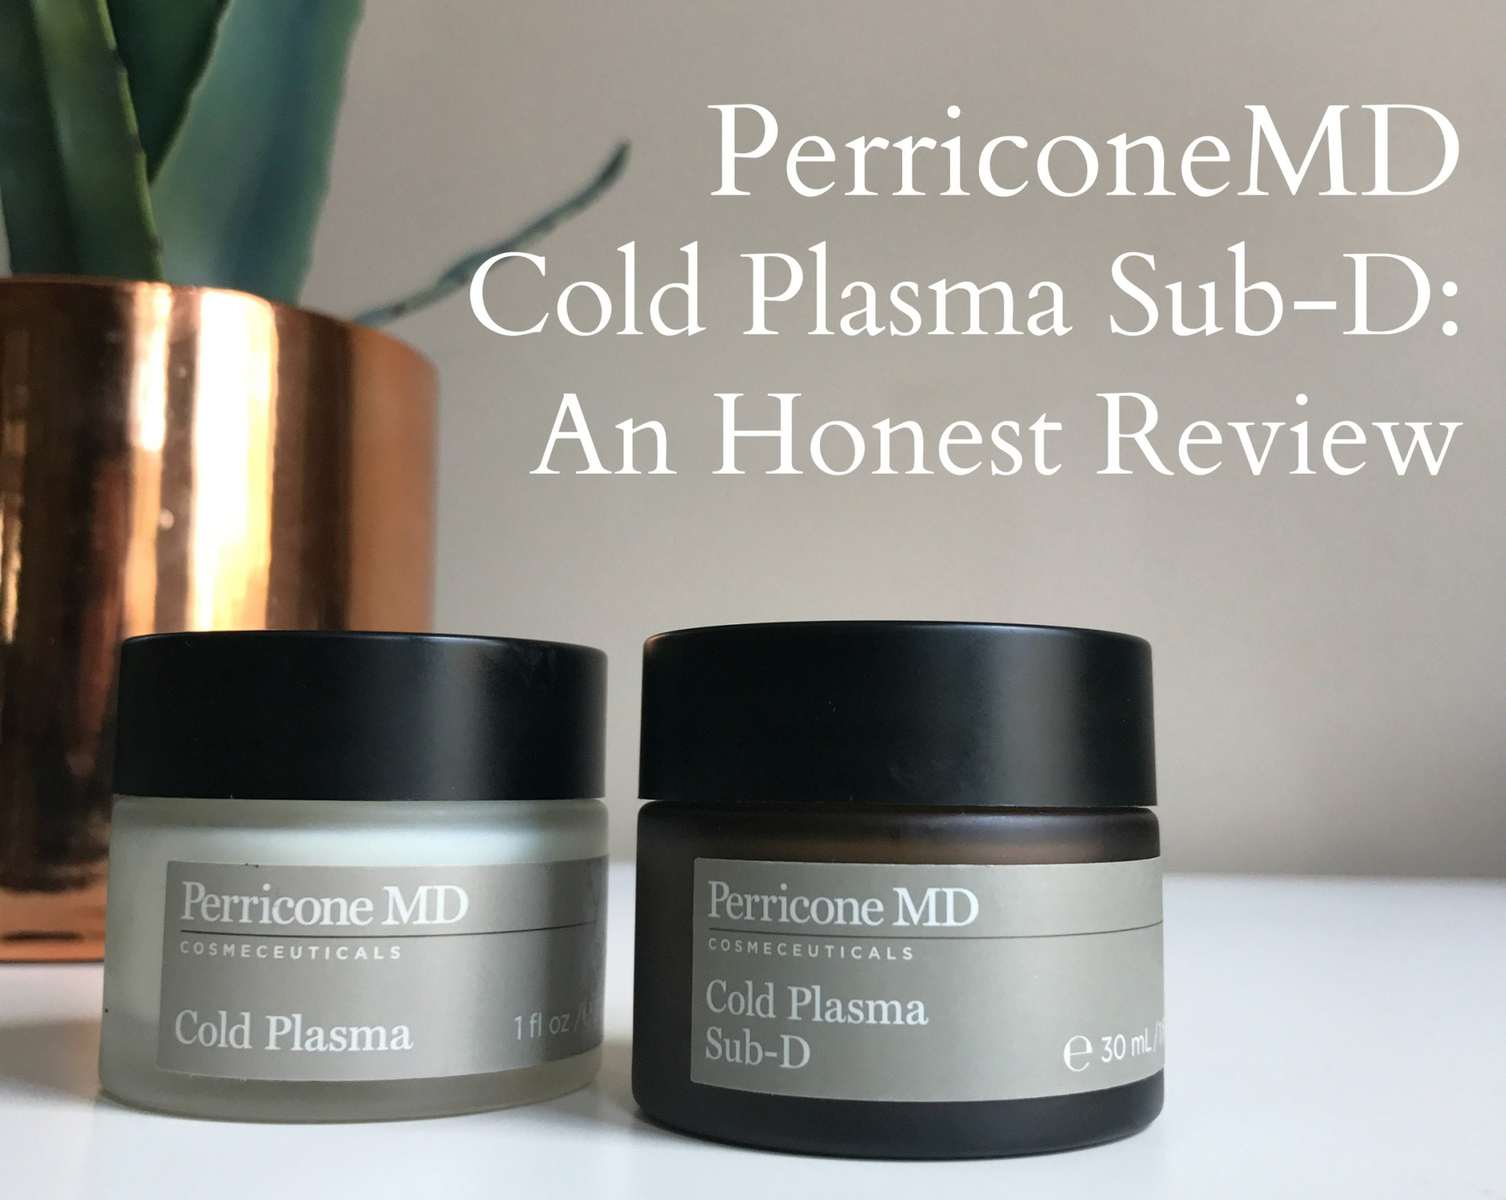 How Far Will You Go for Beauty? My PerriconeMD Sub-D Story